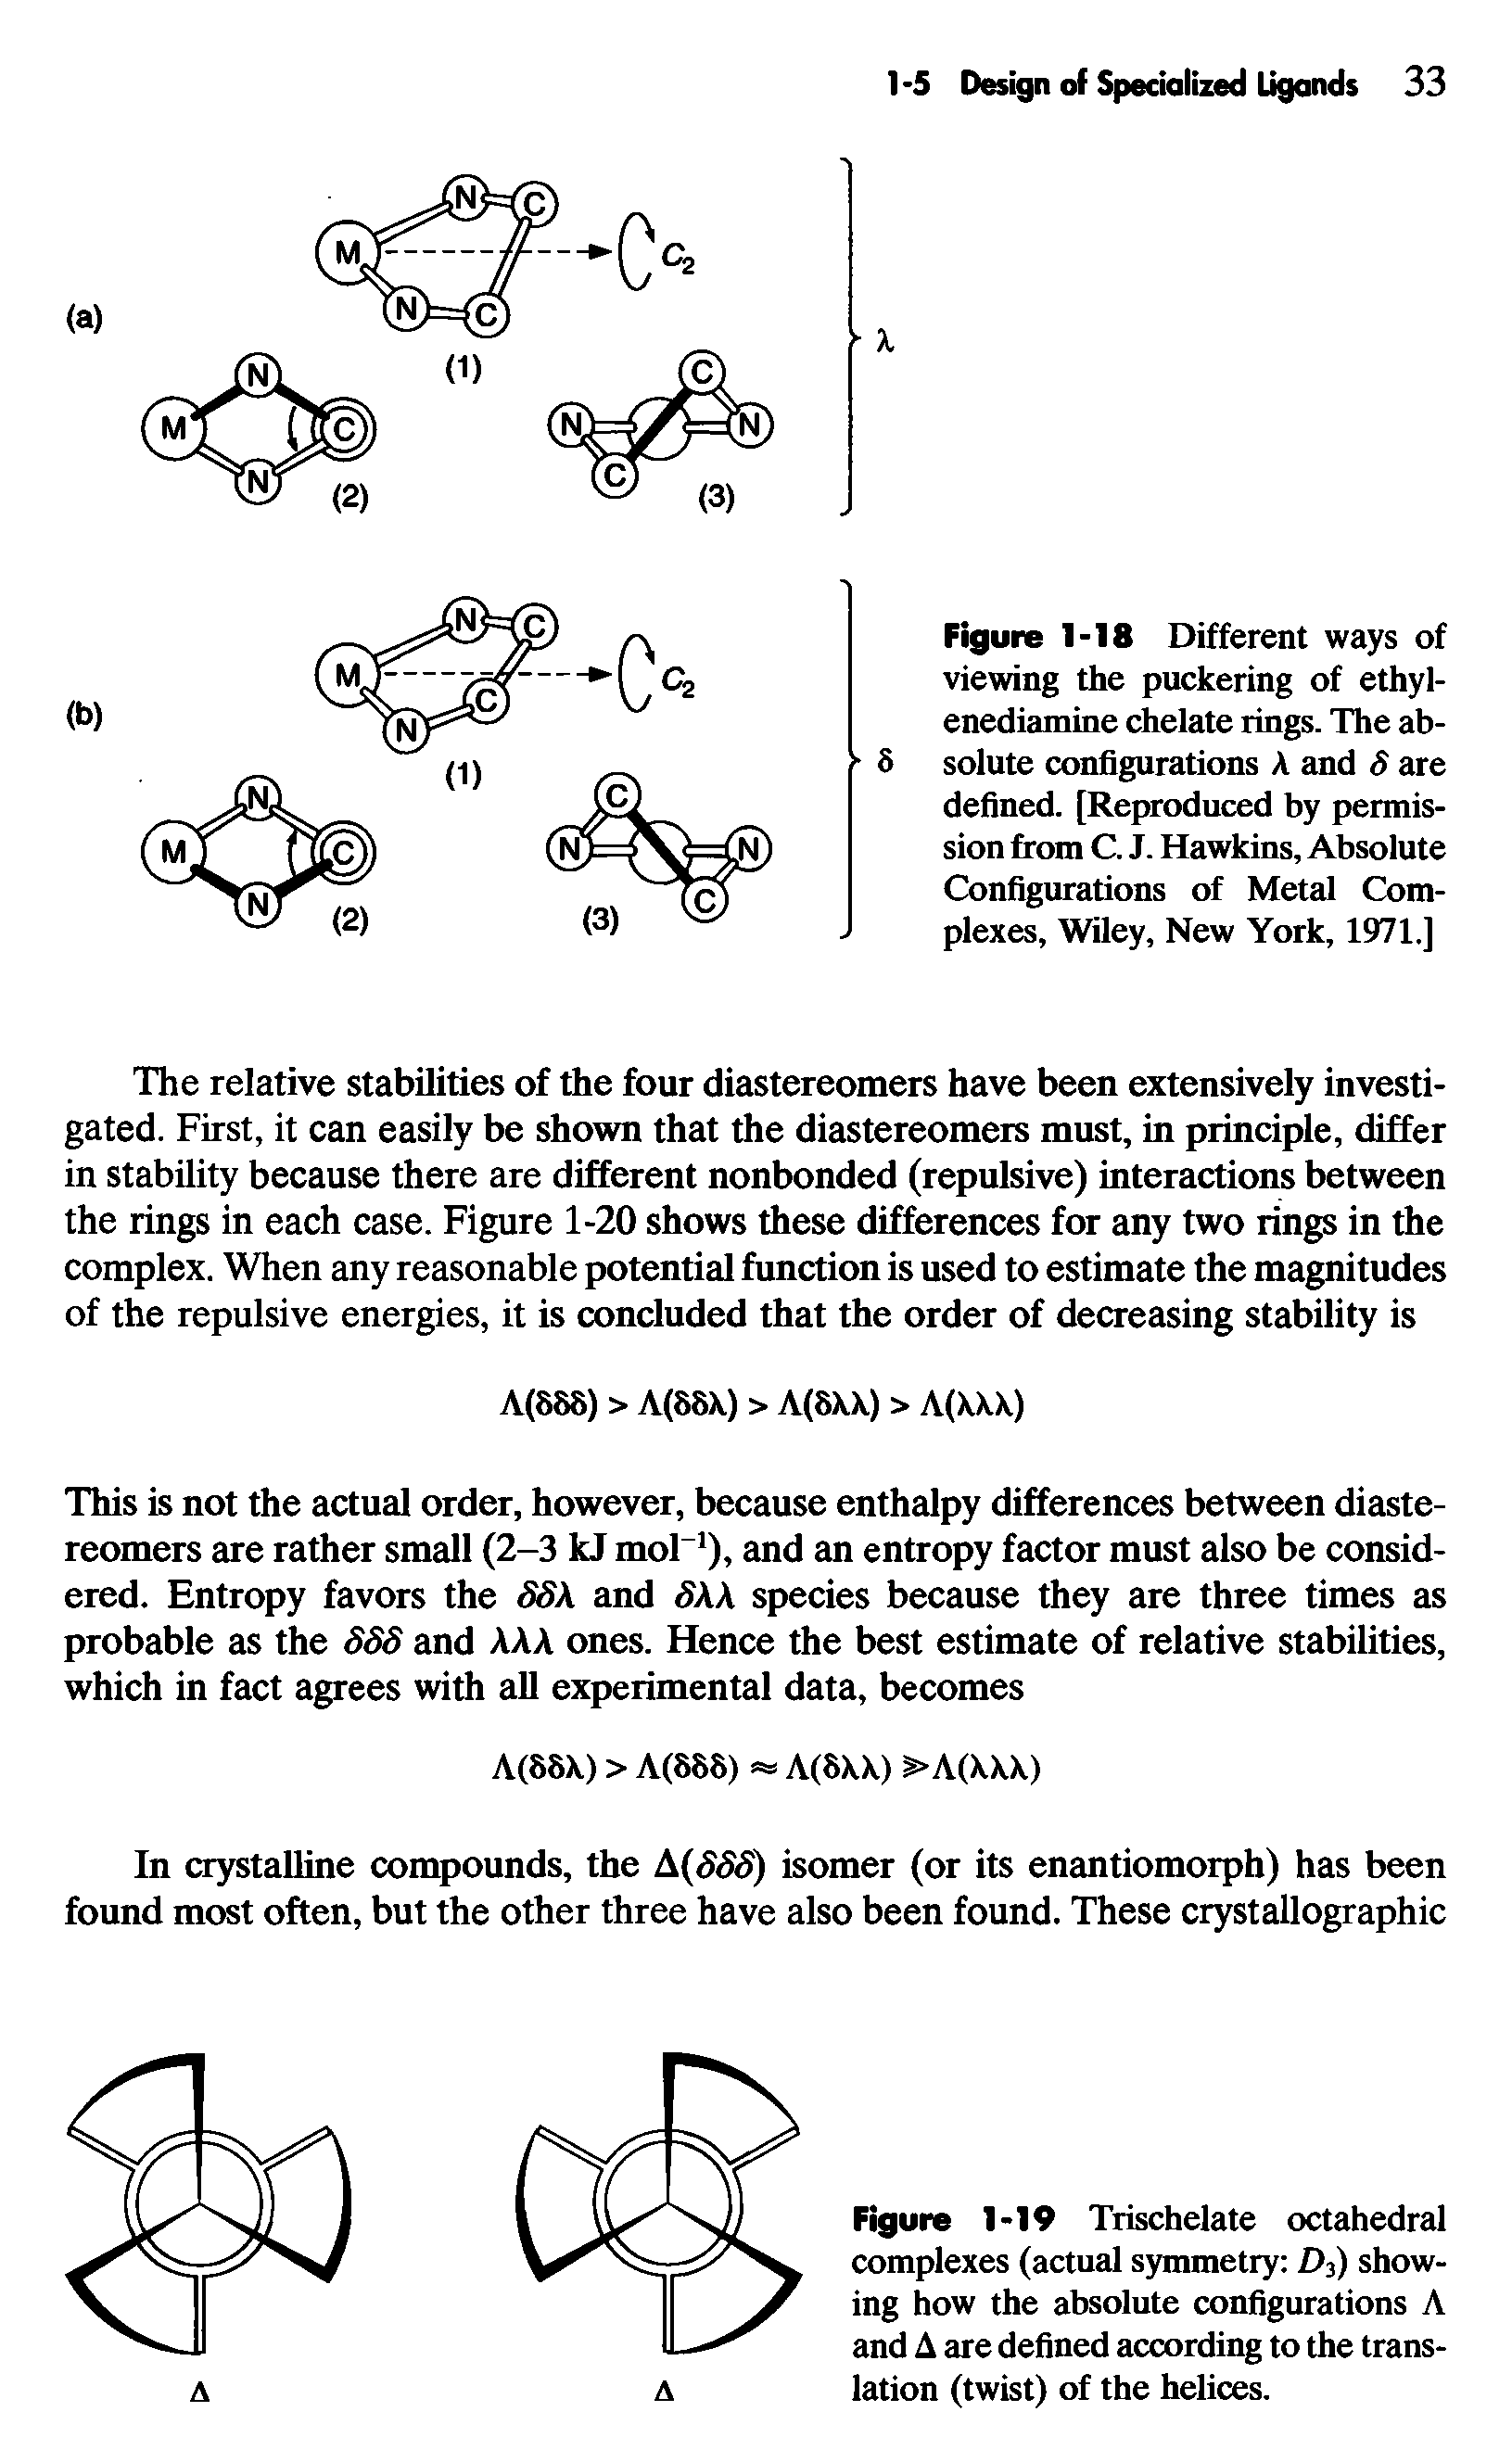 Figure 1-18 Different ways of viewing the puckering of ethyl-enediamine chelate rings. The ab-S solute configurations A and S are defined. [Reproduced by permission from C. J. Hawkins, Absolute Configurations of Metal Complexes, Wiley, New York, 1971.]...